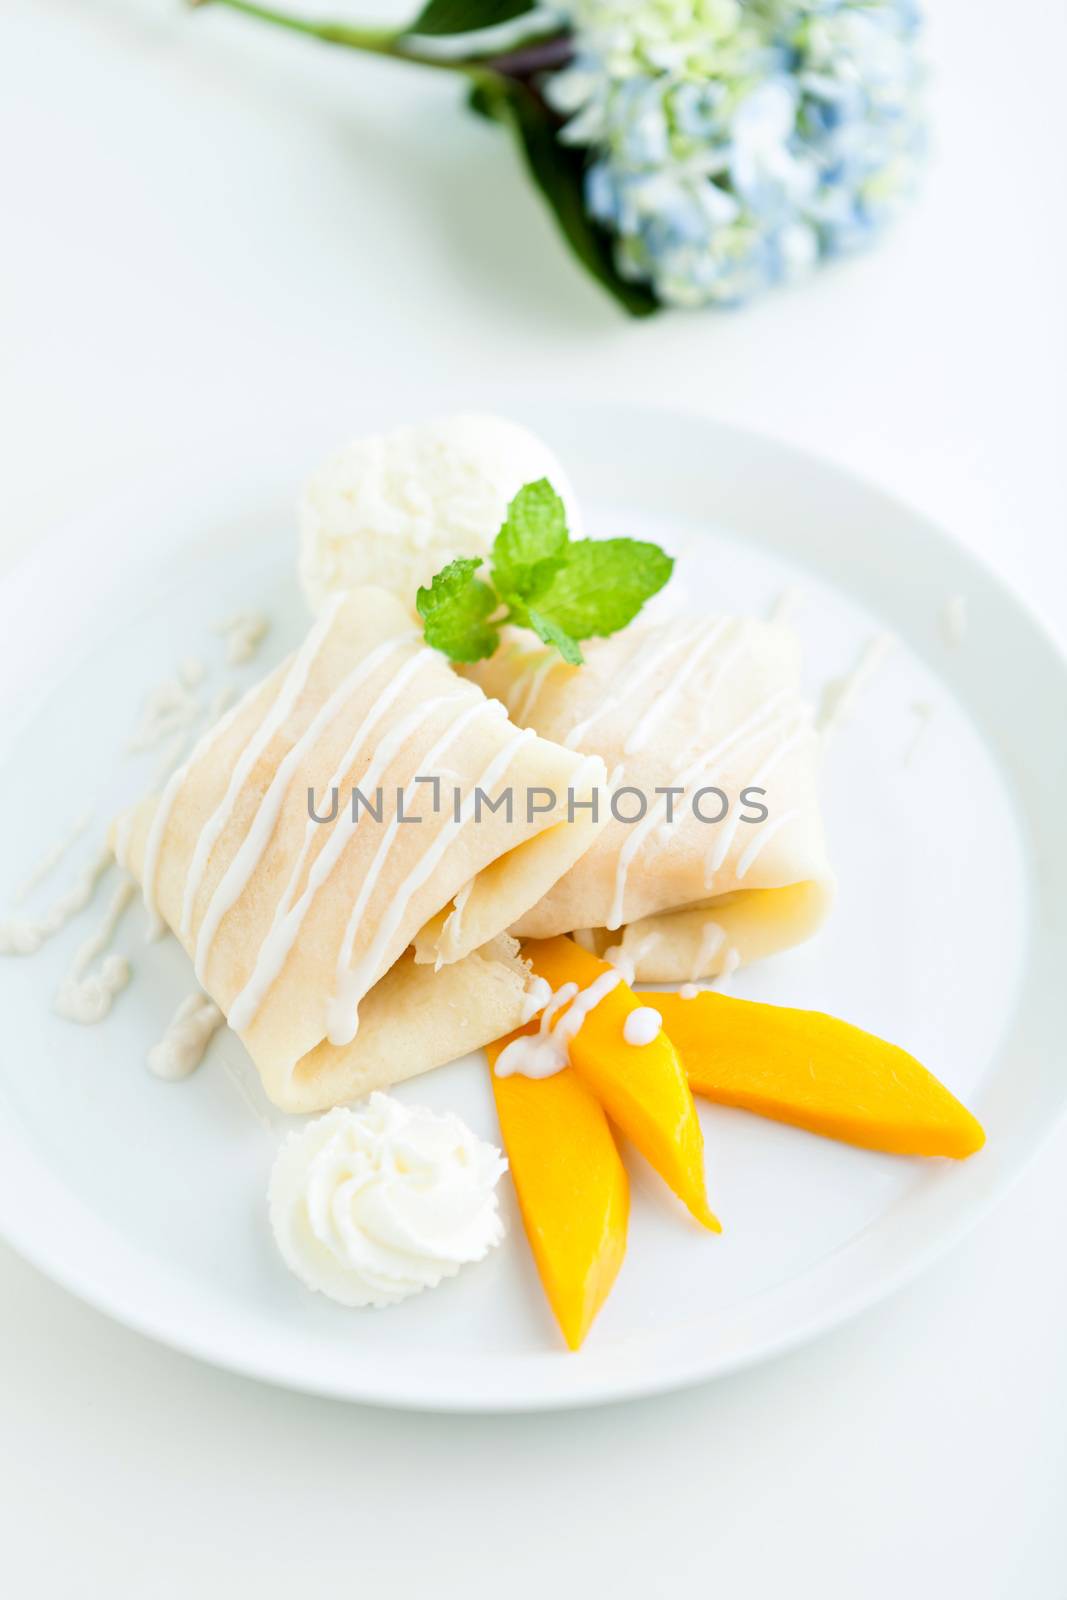 Thai style tropical dessert crepes filled with fresh mango sticky rice and a scoop of coconut ice cream. Shallow depth of field.